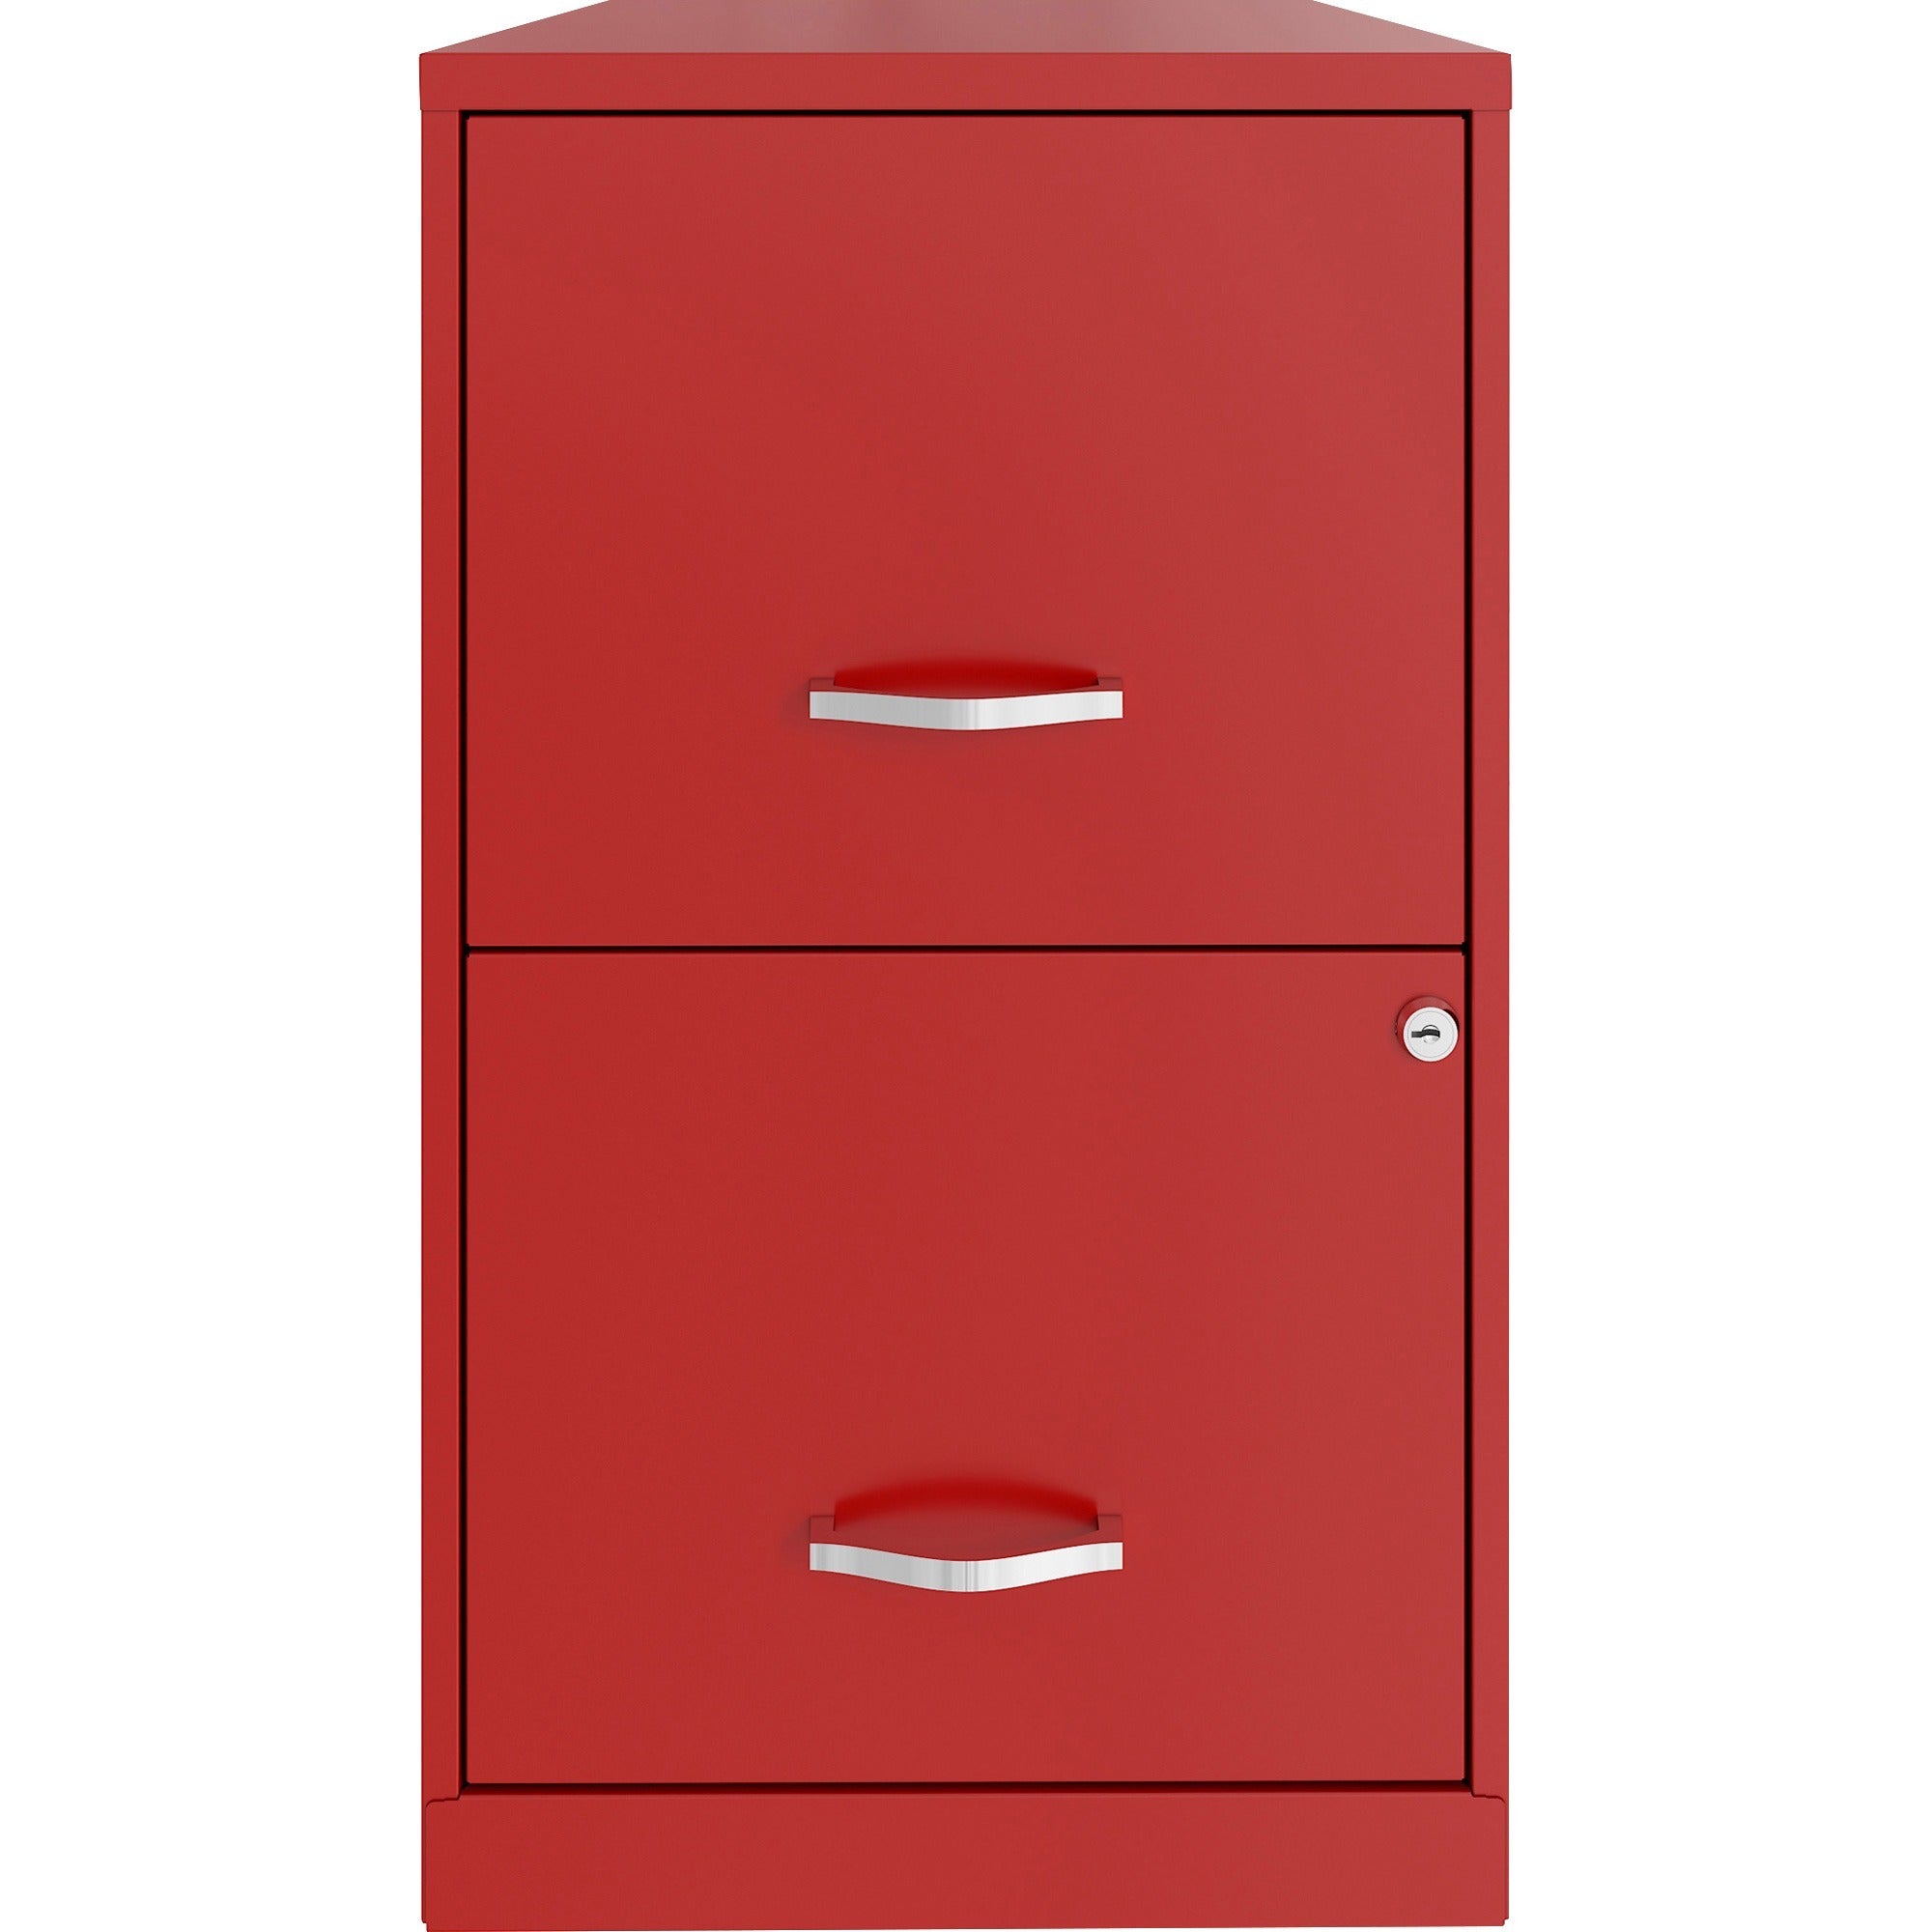 nusparc-file-cabinet-142-x-18-x-245-2-x-drawers-for-file-letter-vertical-locking-drawer-glide-suspension-nonporous-surface-red-baked-enamel-steel-recycled_nprvf218aard - 2